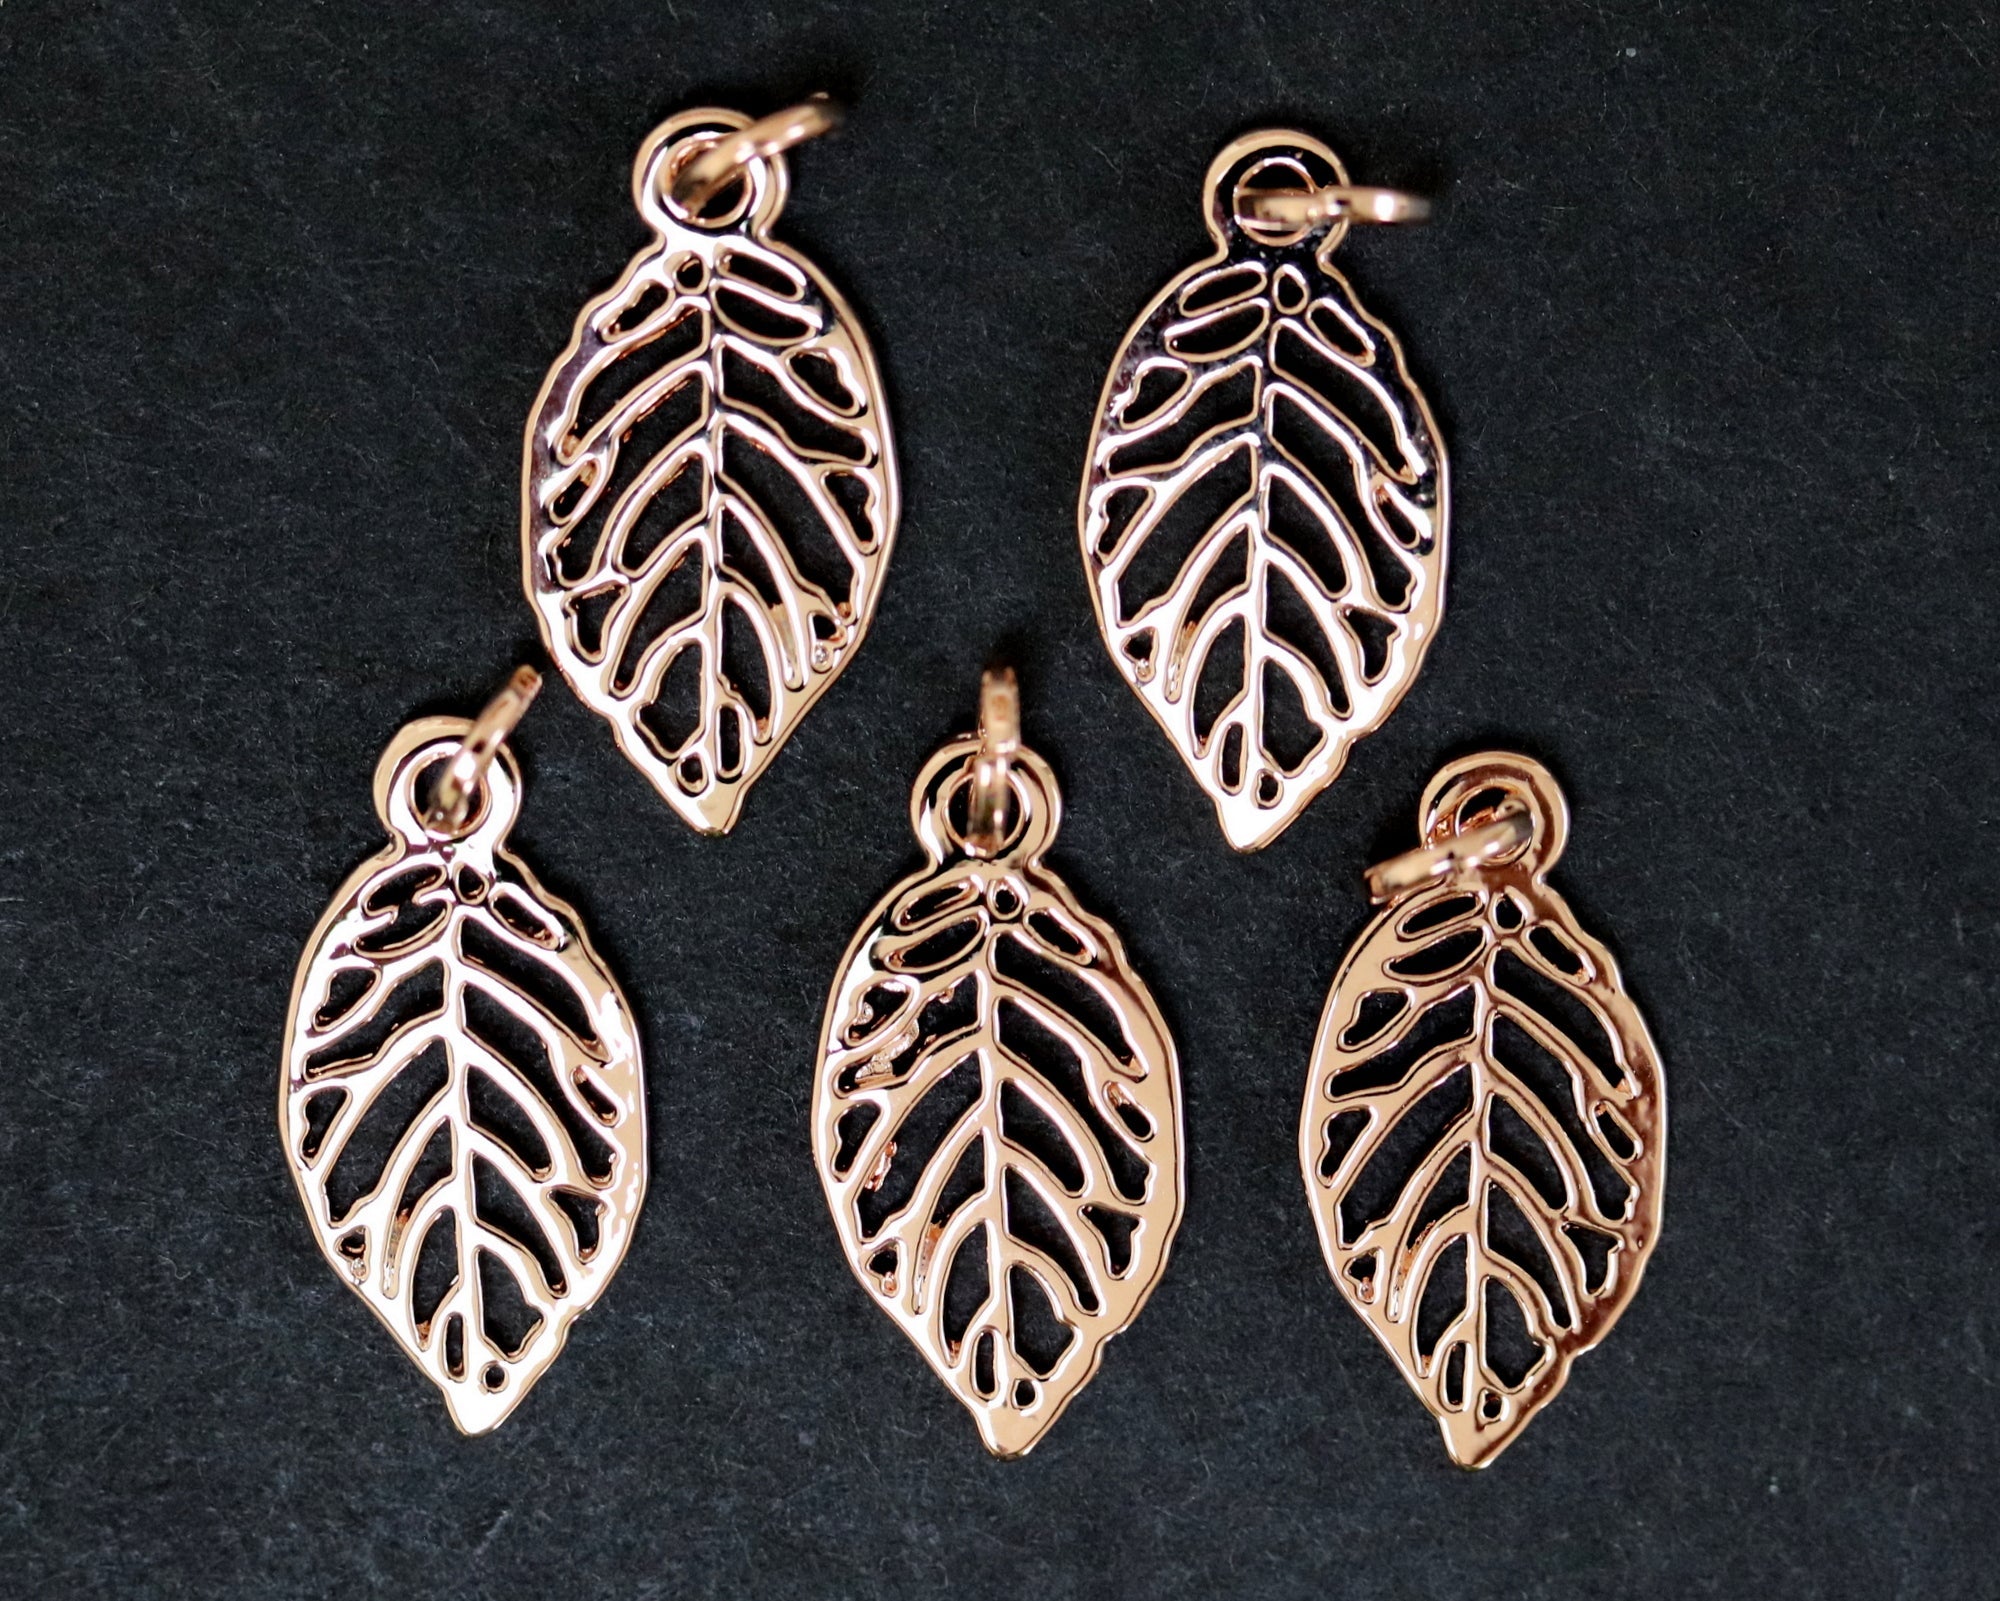 Leaf charm 10x19mm 14K Rose Gold plated metal alloy pendant charm